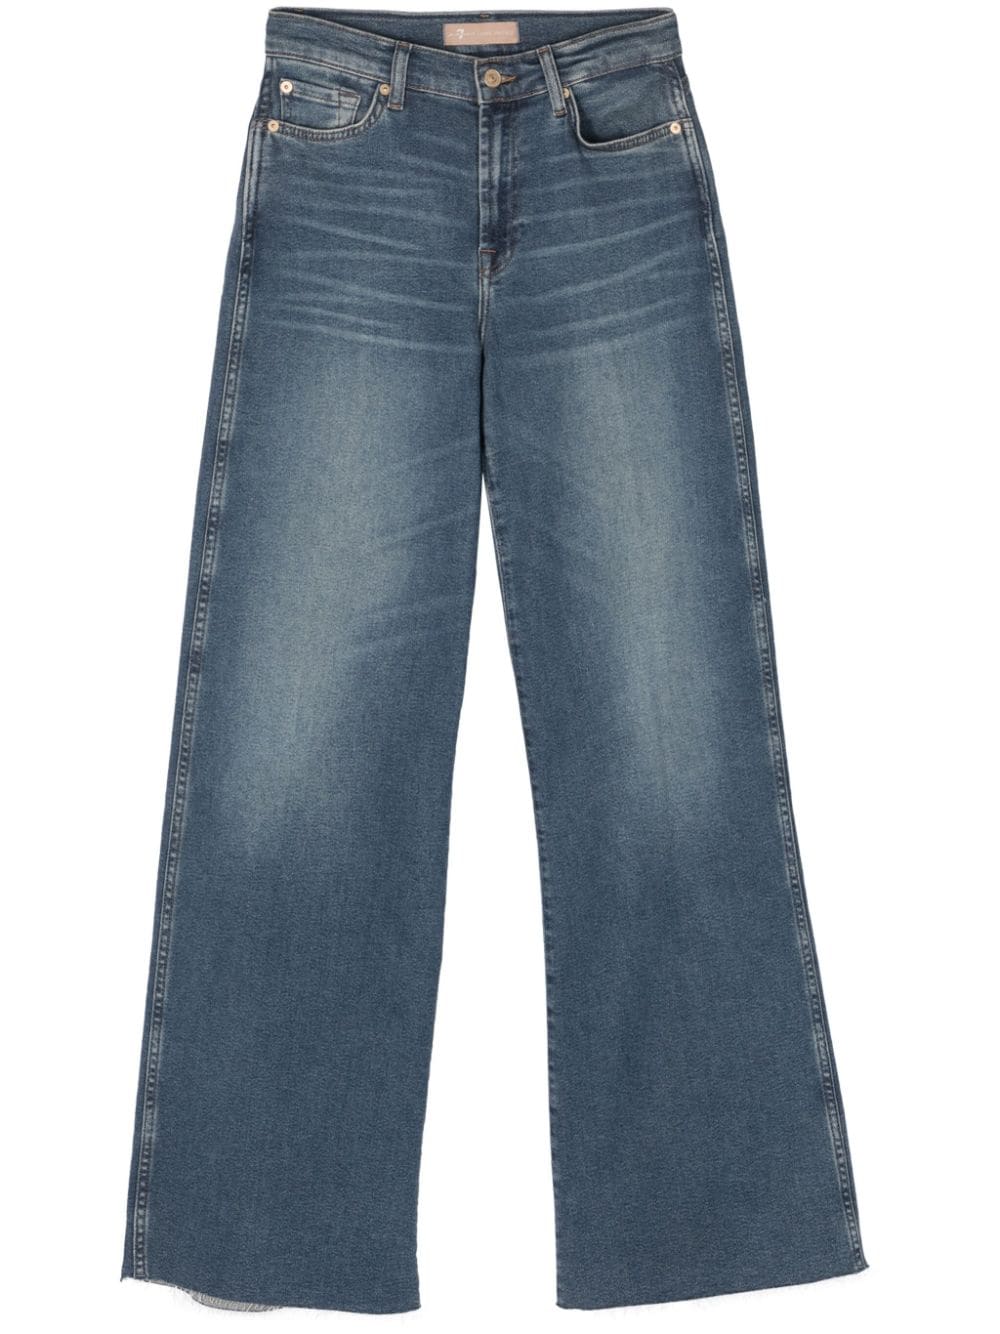 7 For All Mankind Lotta high-rise wide-leg jeans - Blue von 7 For All Mankind